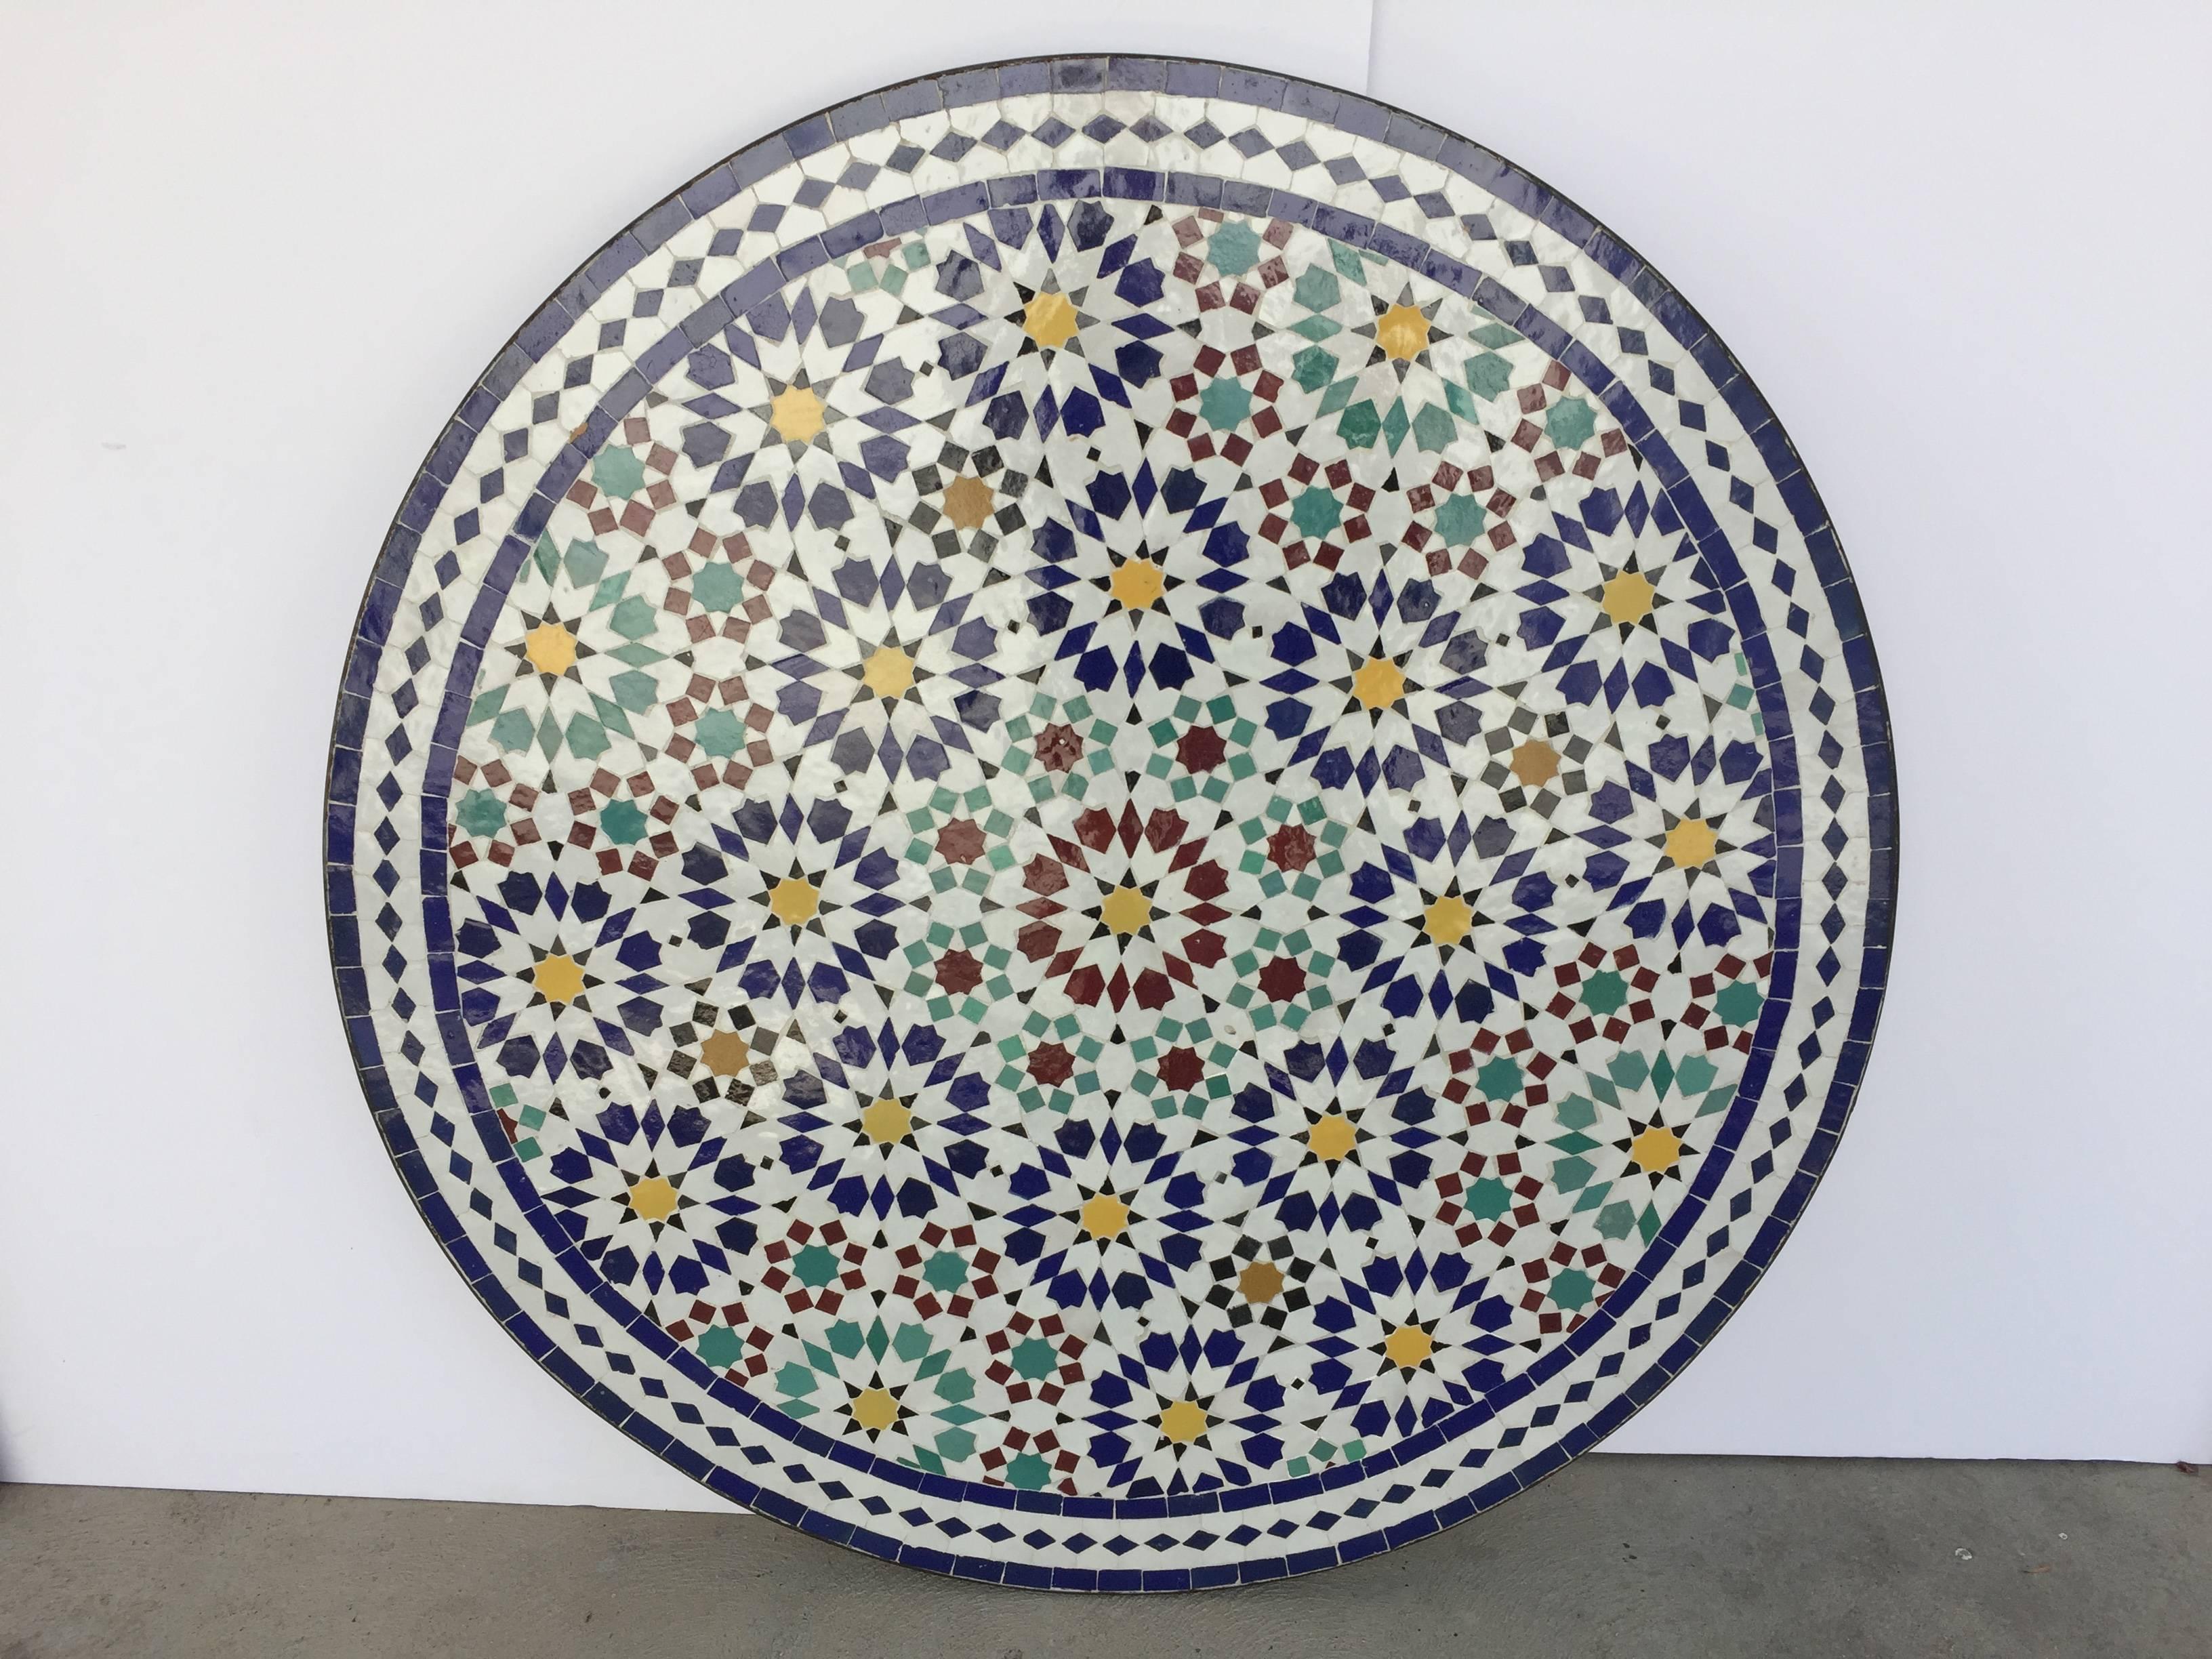 20th Century Moroccan Outdoor Mosaic Tile Table from Fez in Traditional Moorish Design For Sale